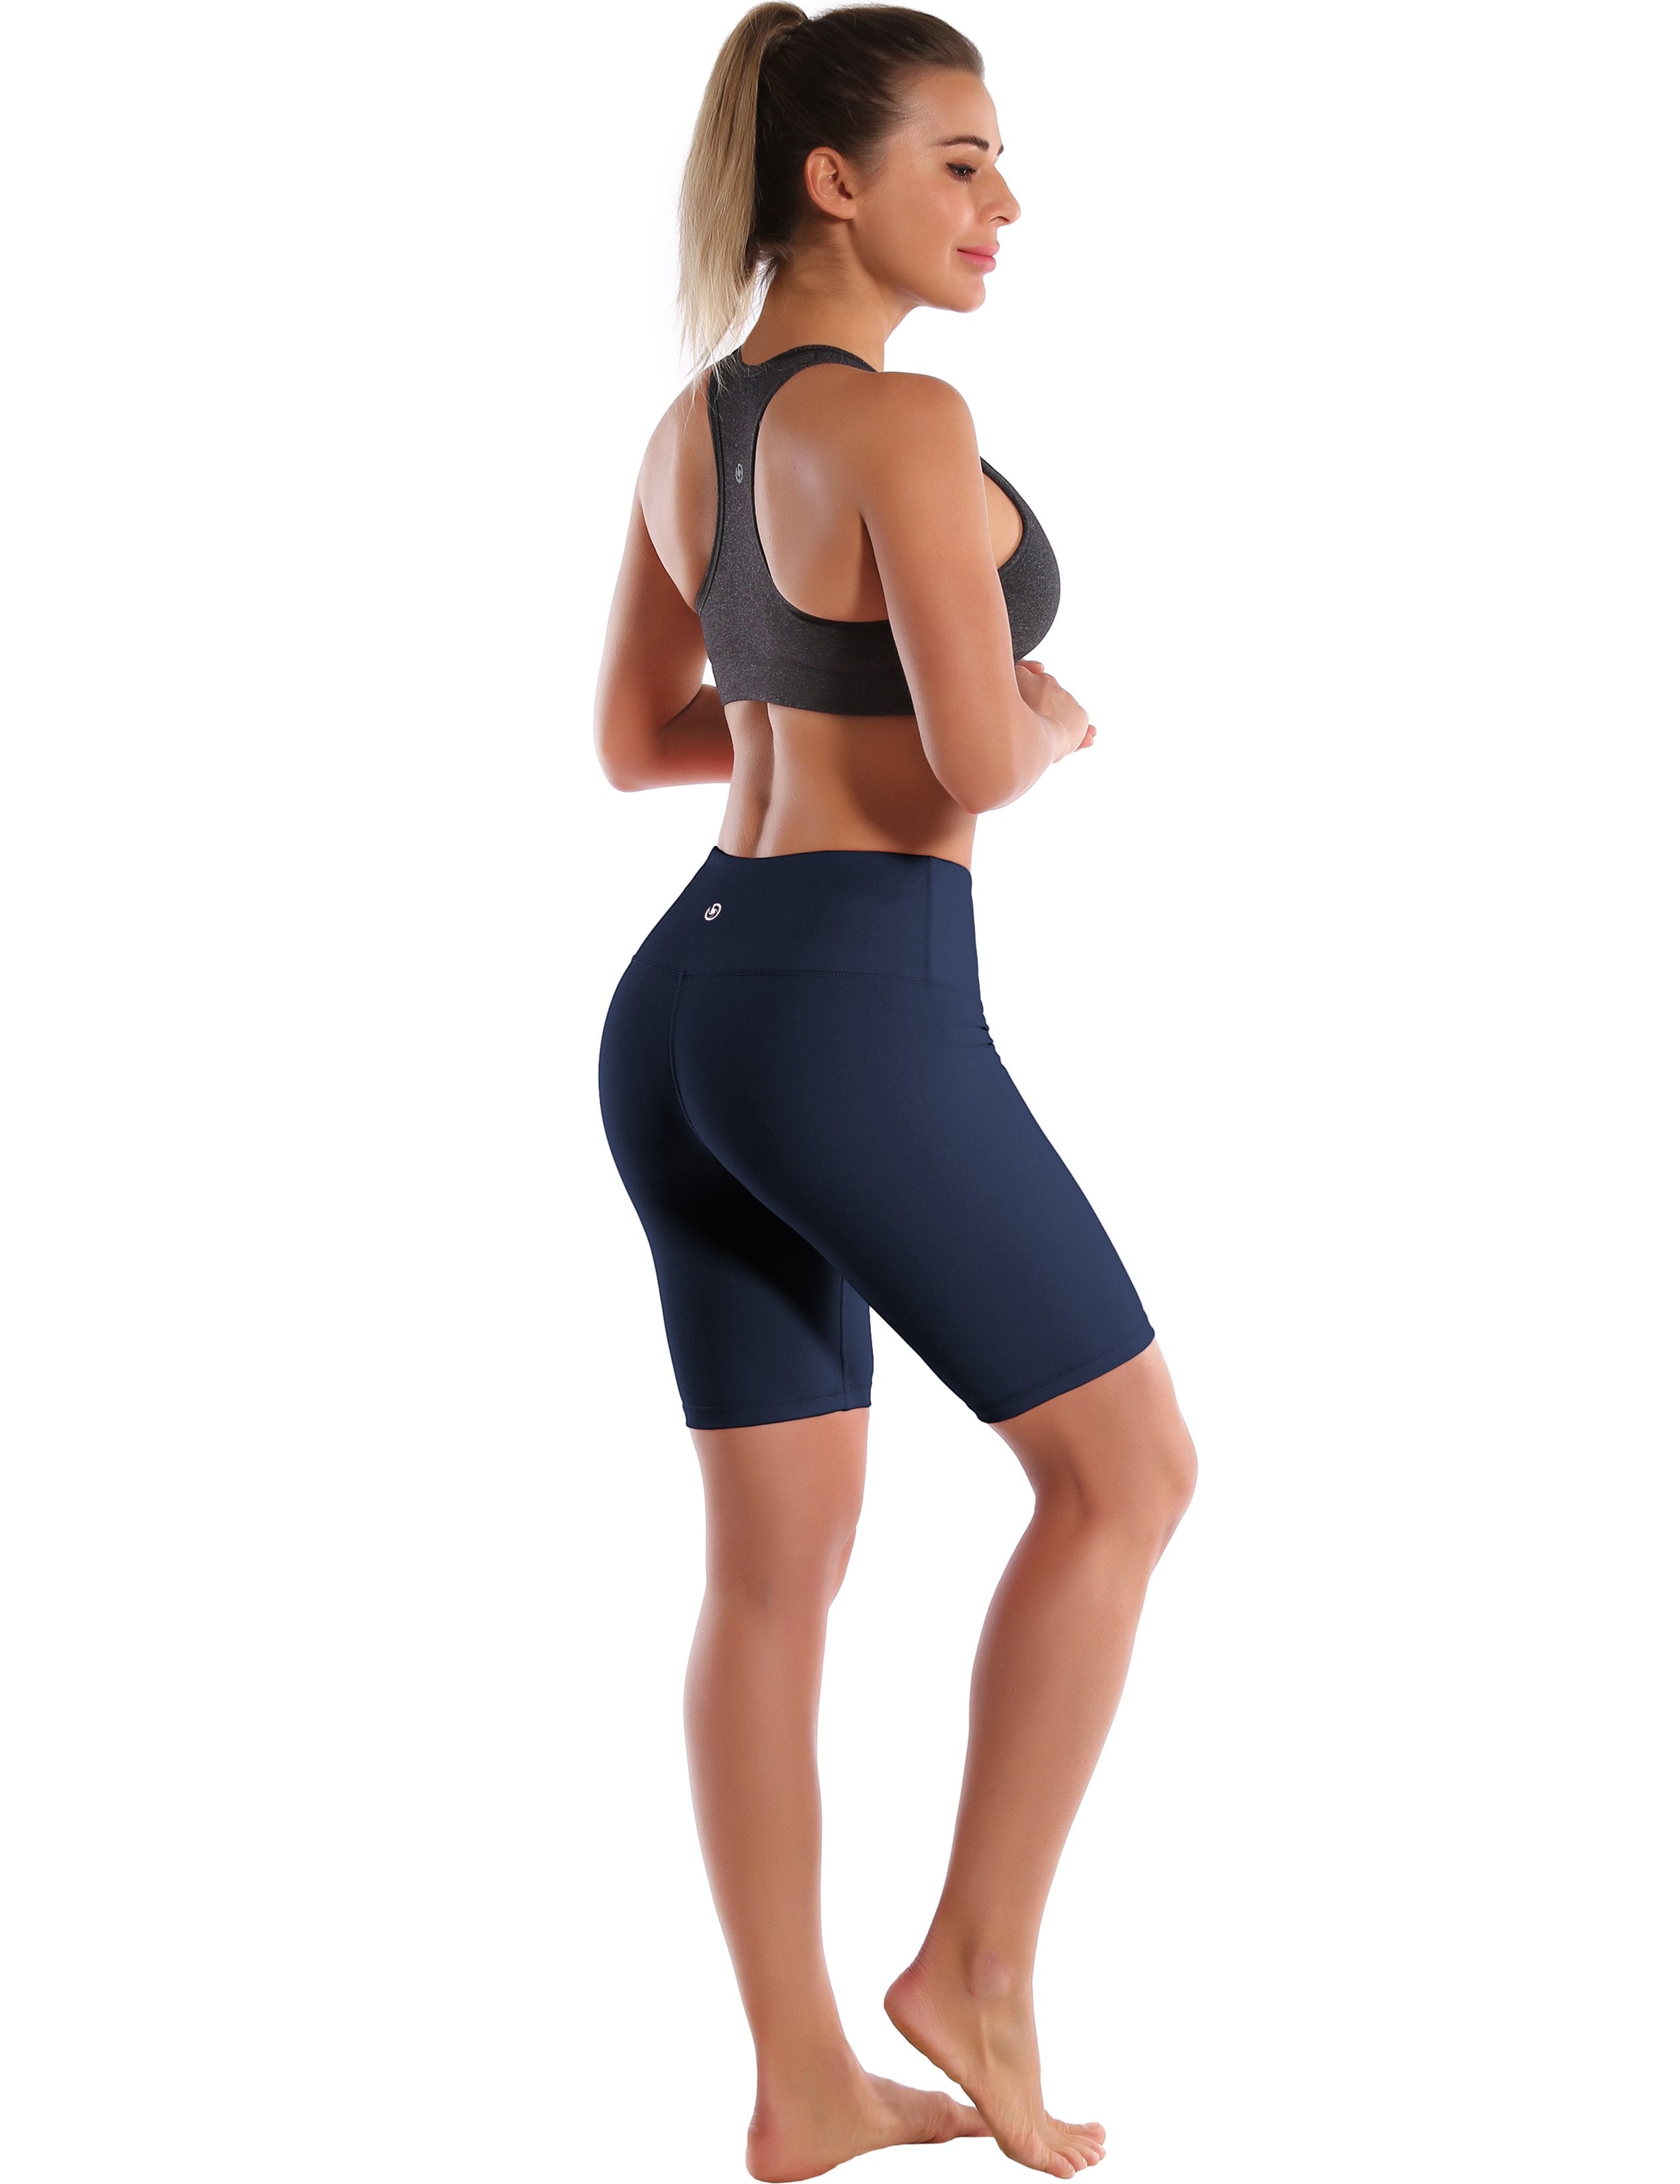 8" High Waist Running Shorts darknavy Sleek, soft, smooth and totally comfortable: our newest style is here. Softest-ever fabric High elasticity High density 4-way stretch Fabric doesn't attract lint easily No see-through Moisture-wicking Machine wash 75% Nylon, 25% Spandex